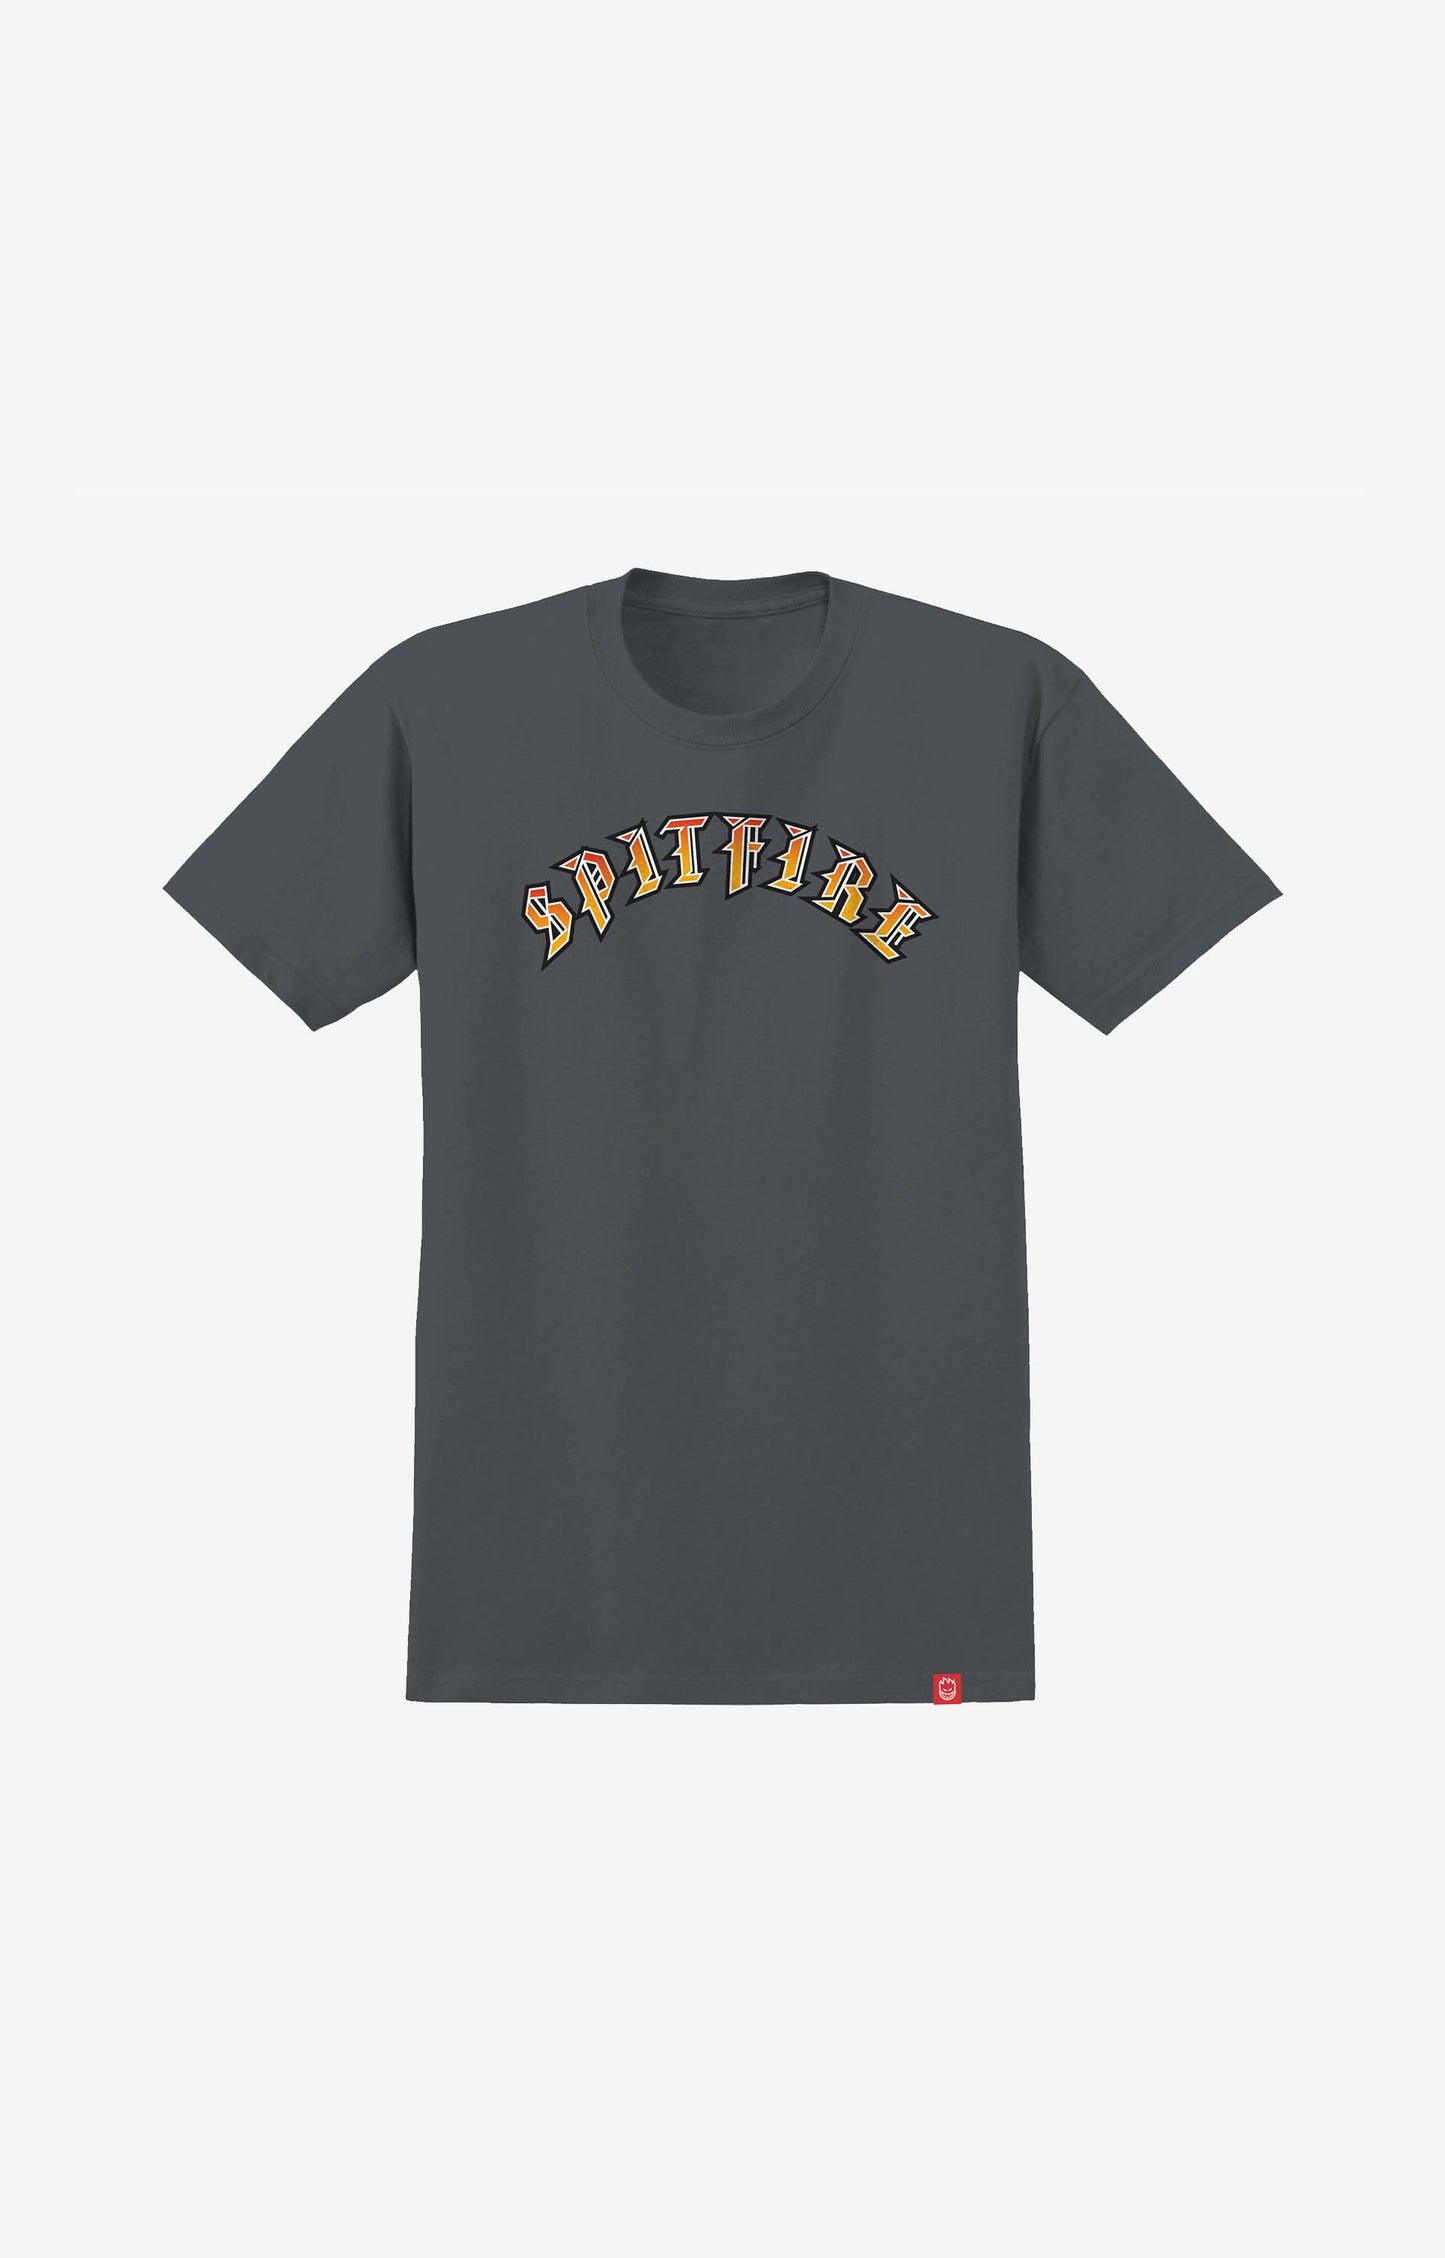 Spitfire Old E Youth T-Shirt, Charcoal